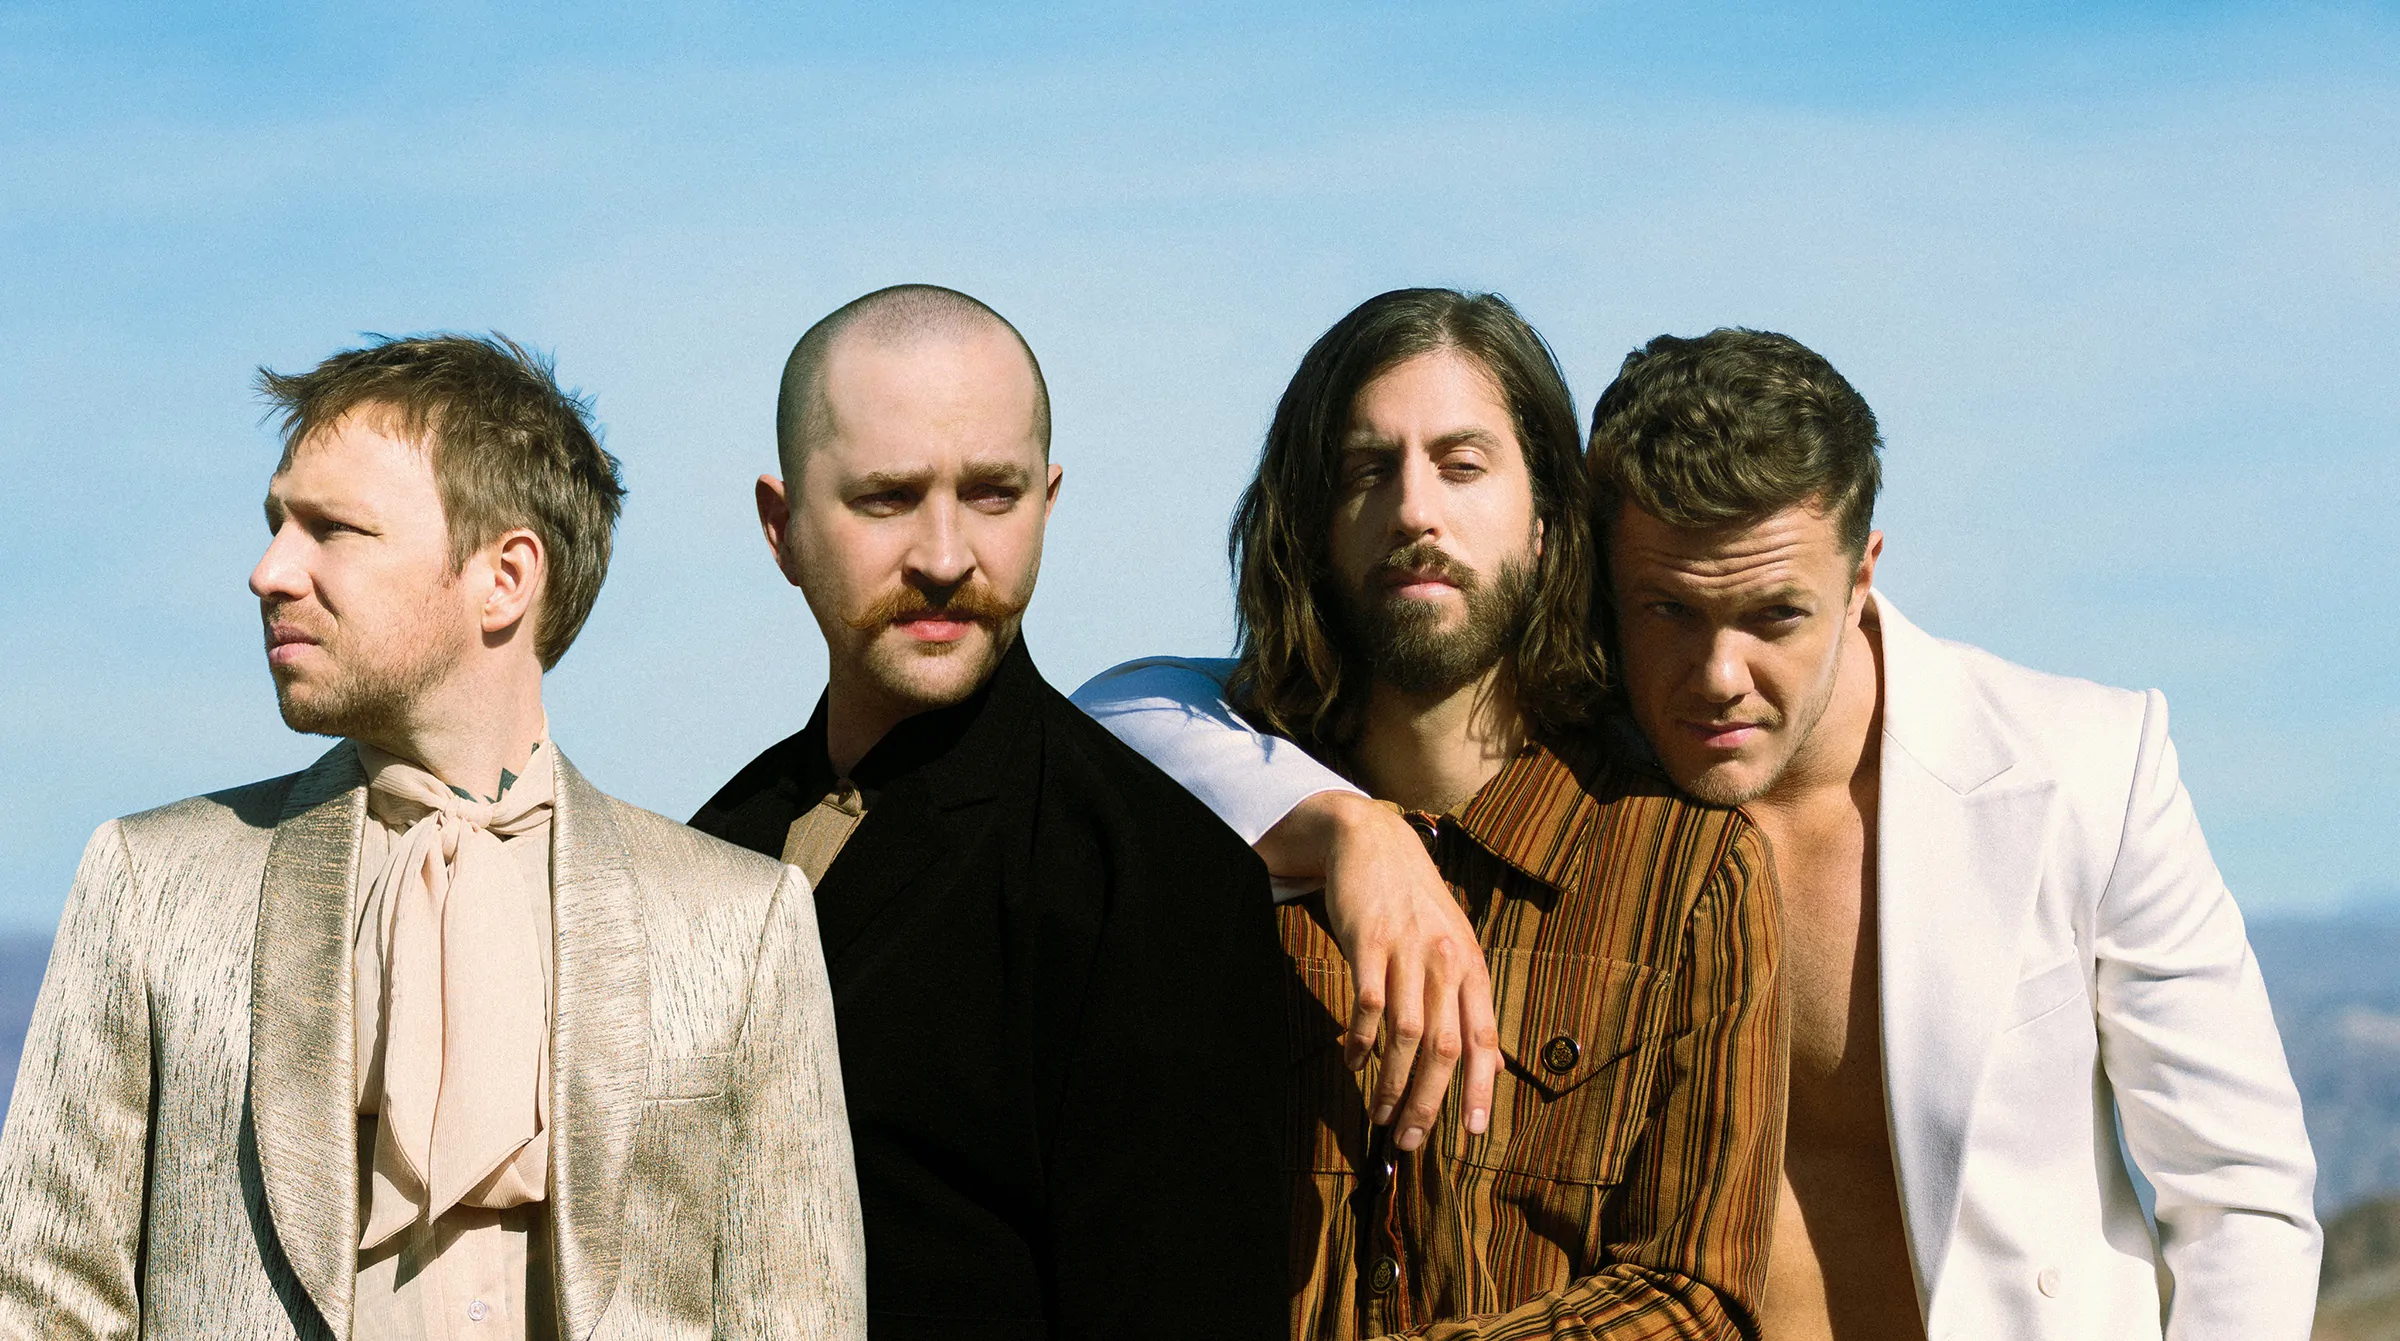 IMAGINE DRAGONS return with two new songs – ‘Follow You’ and ‘Cutthroat’ – Listen Now!